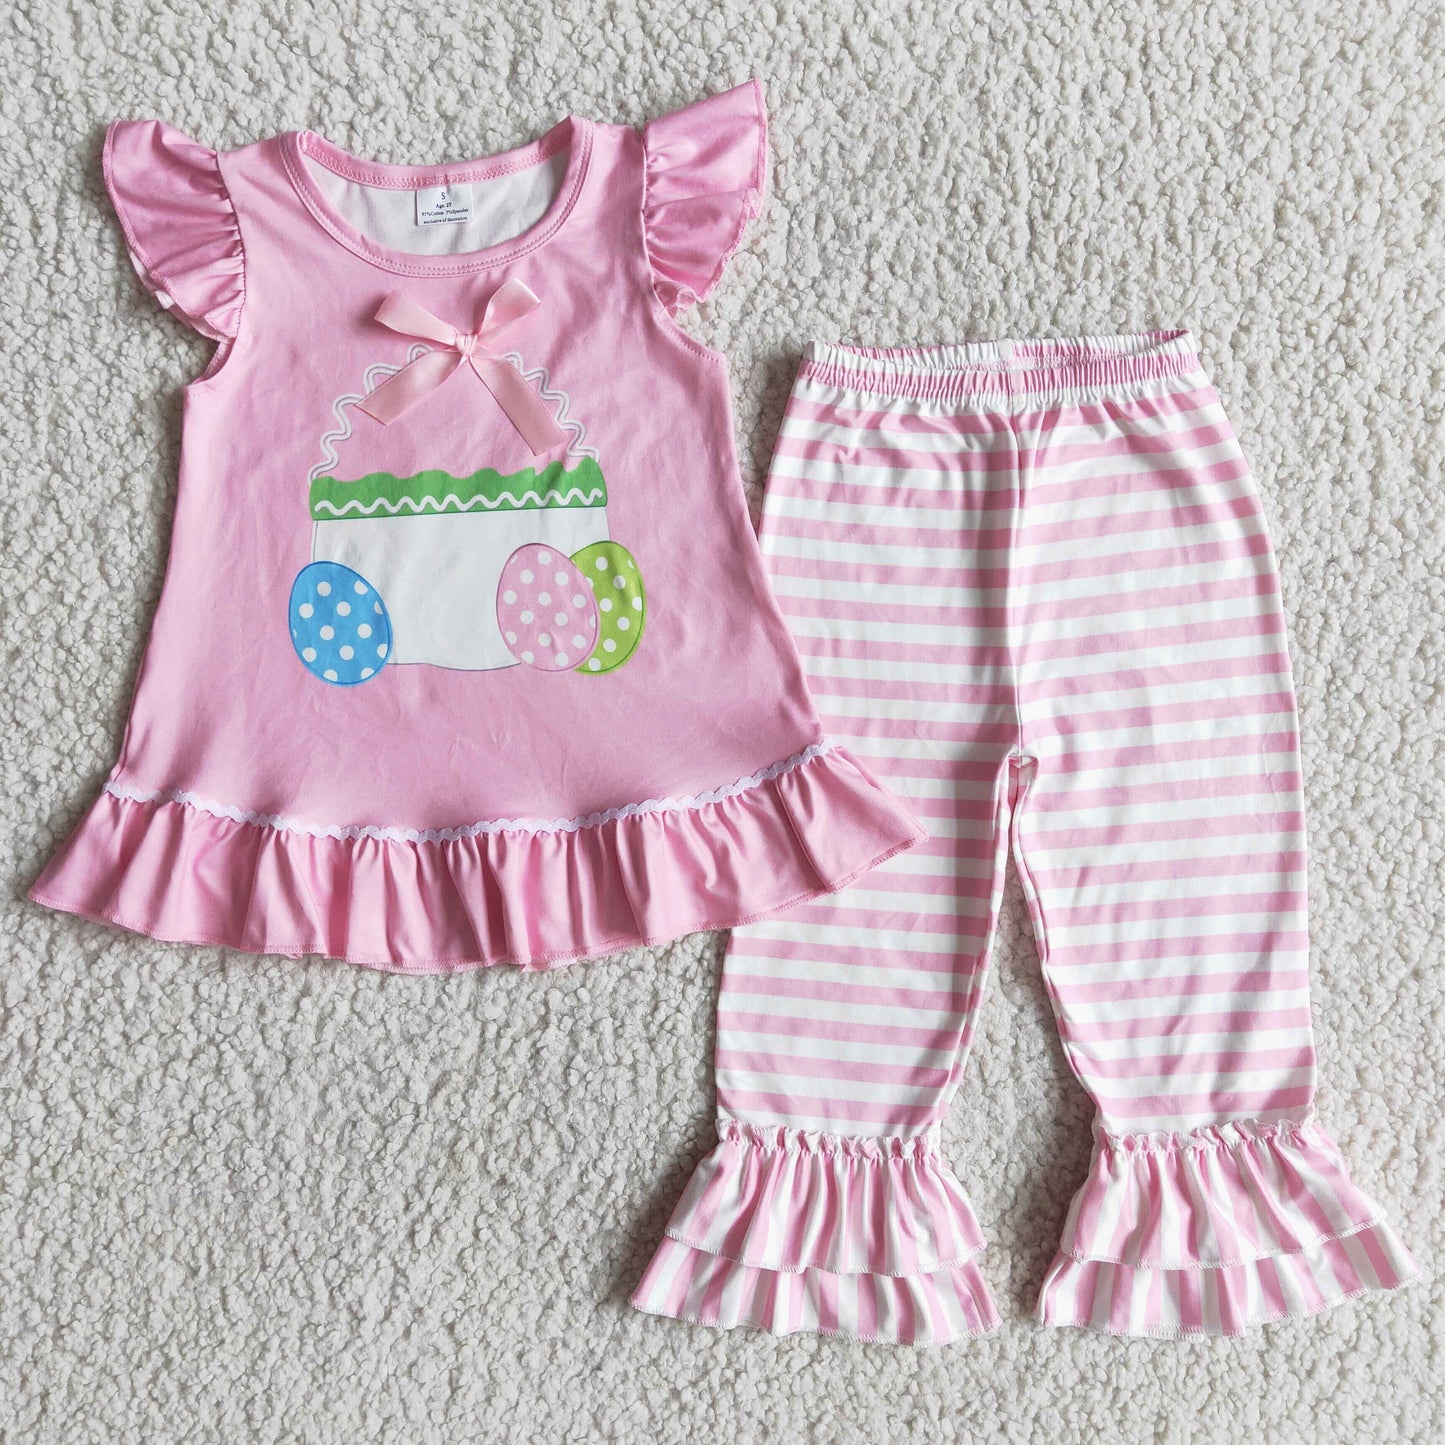 Baby girls rabbit print outfit